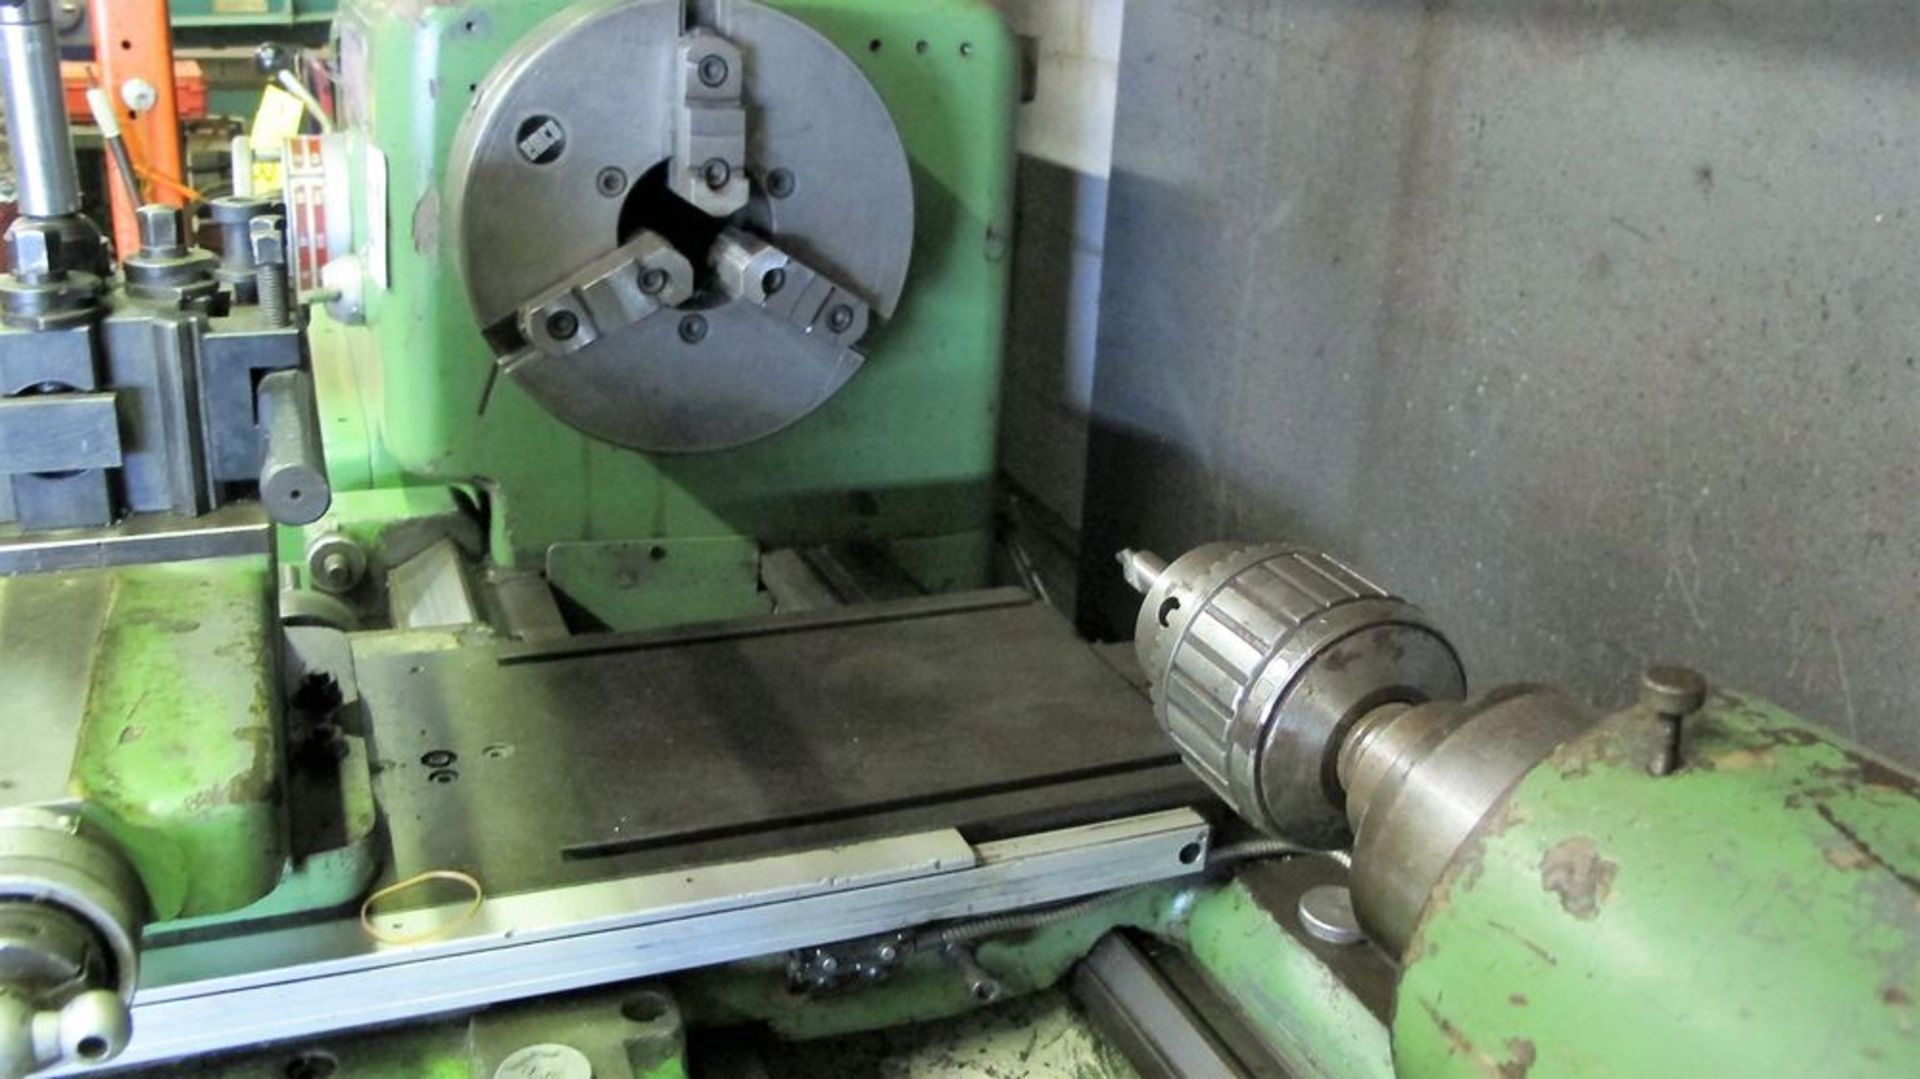 SIRCO PA-24 LATHE, S/N 6479, 3-JAW CHUCK, TAILSTOCK, QUICK CHANGE TOOL HOLDER, 44" BED, 24" SWING, - Image 6 of 8